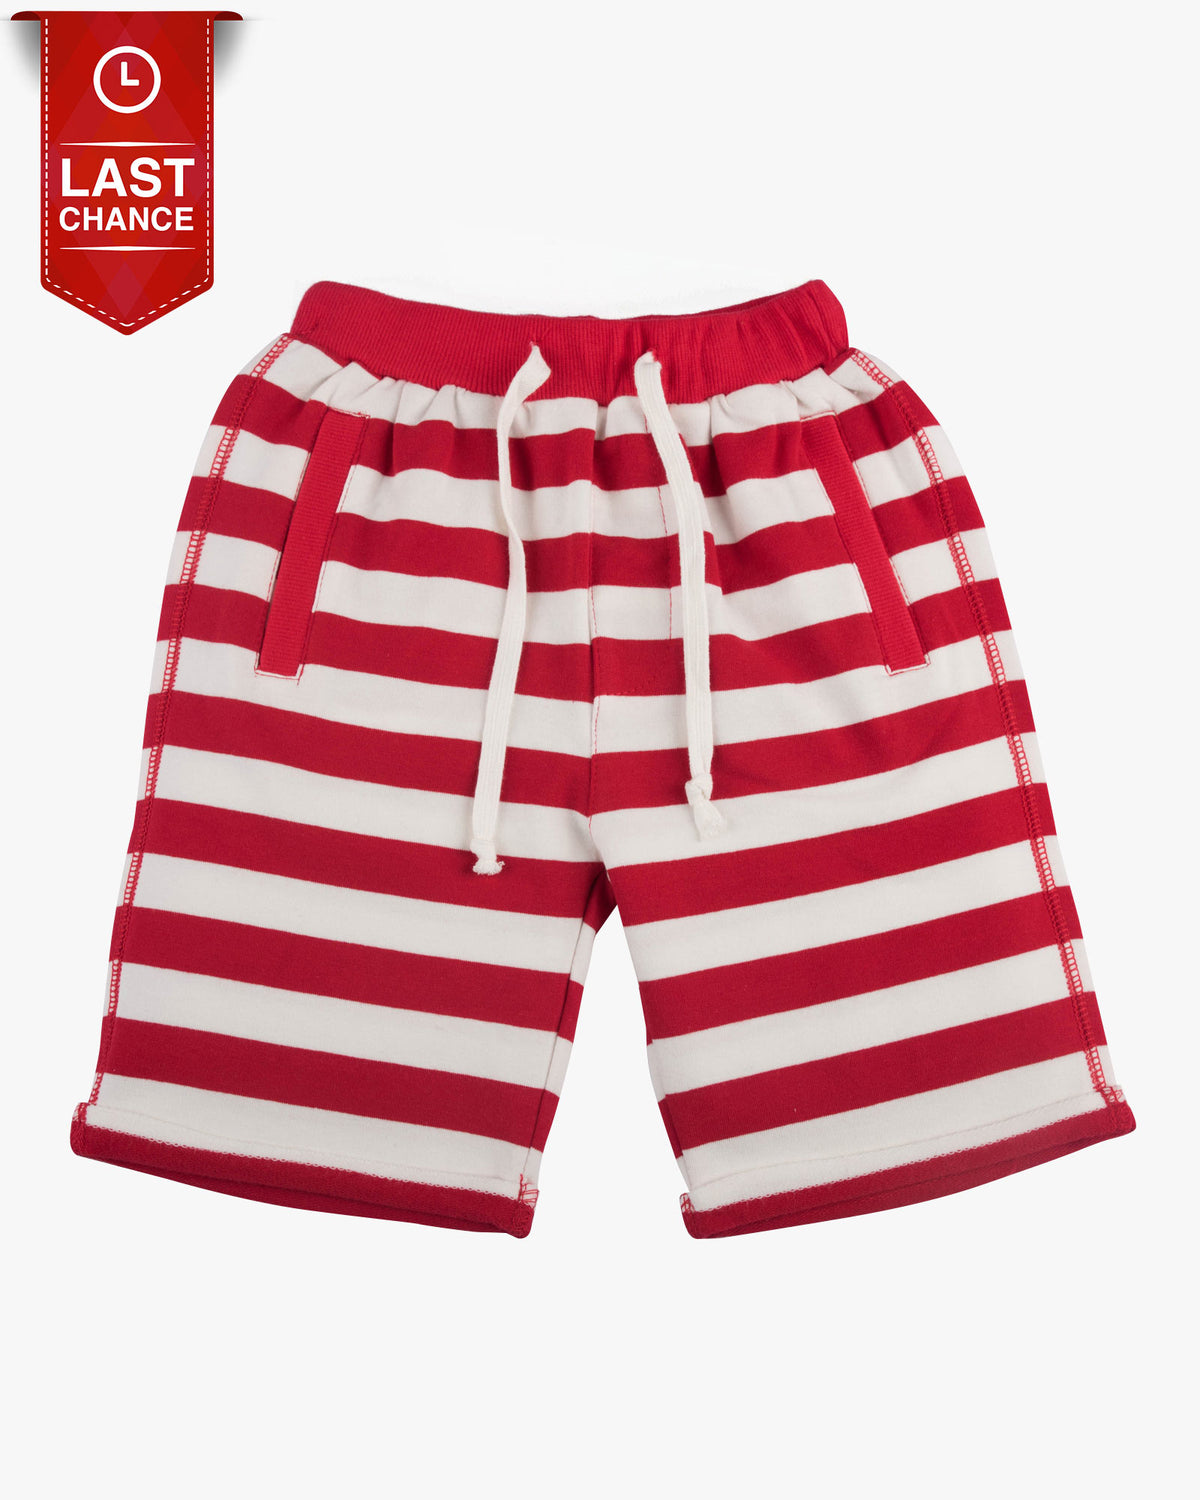 Trackie Short in Stripes Red